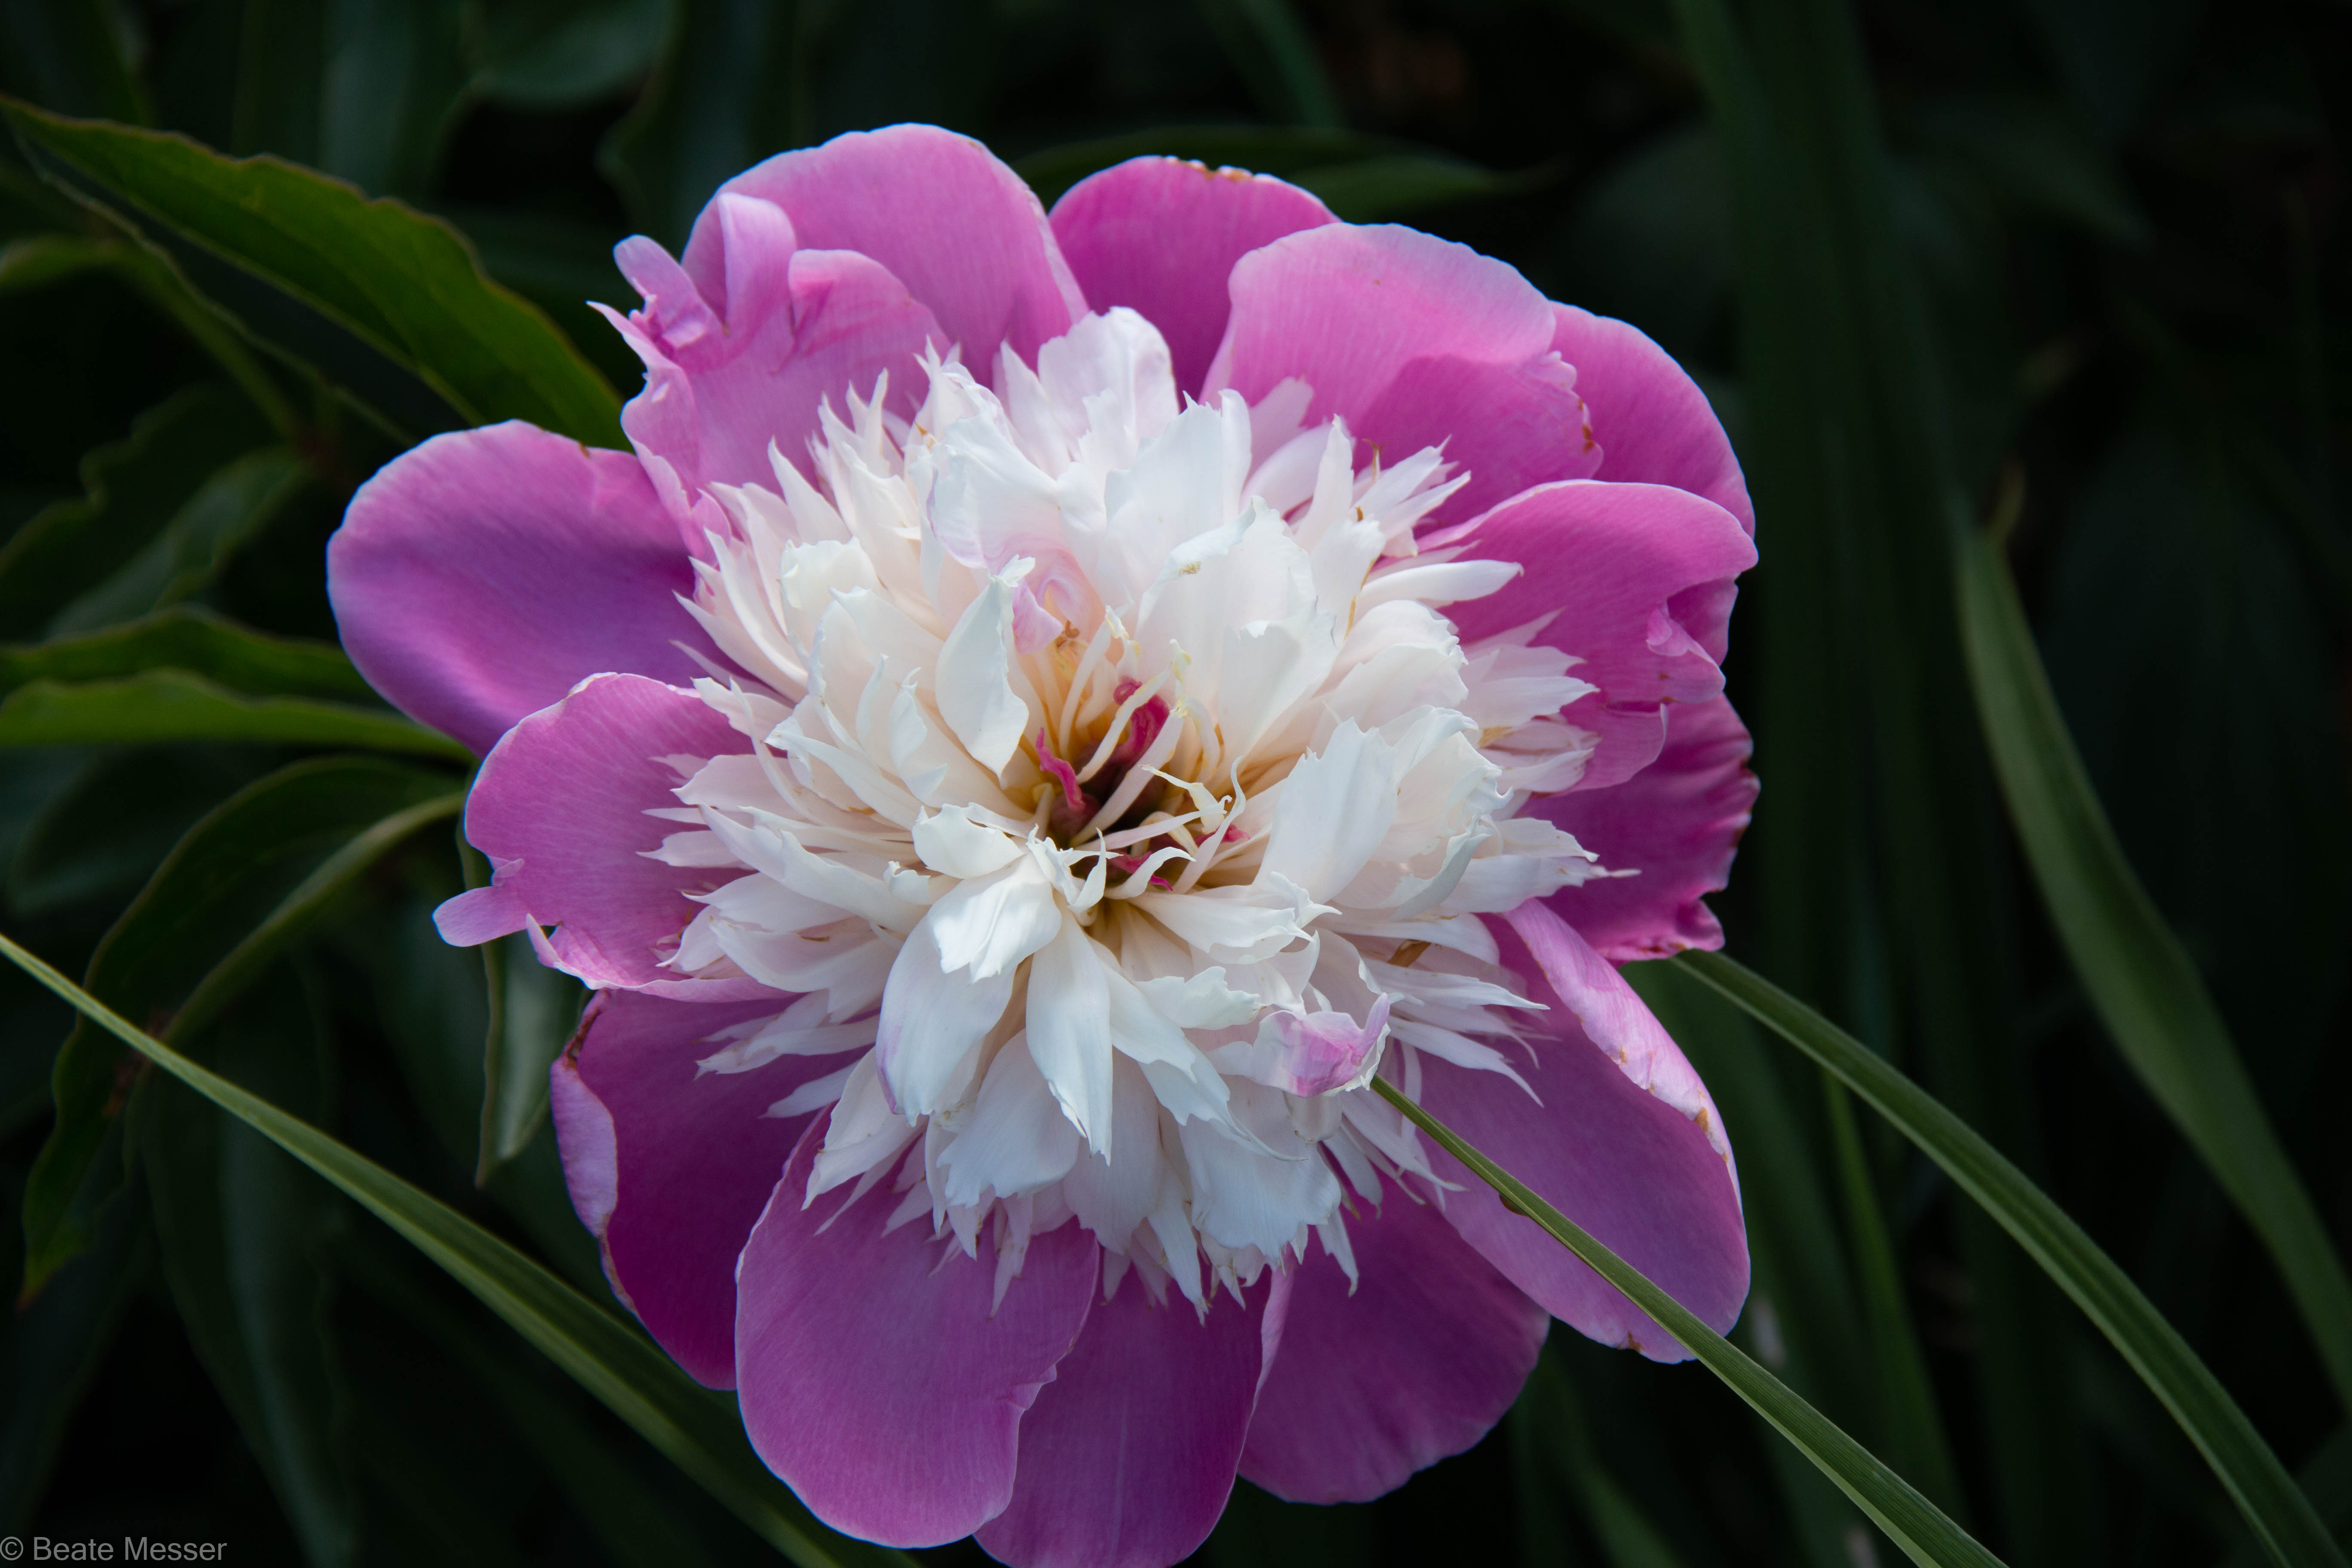 Peonies and Clematis are blooming in the garden